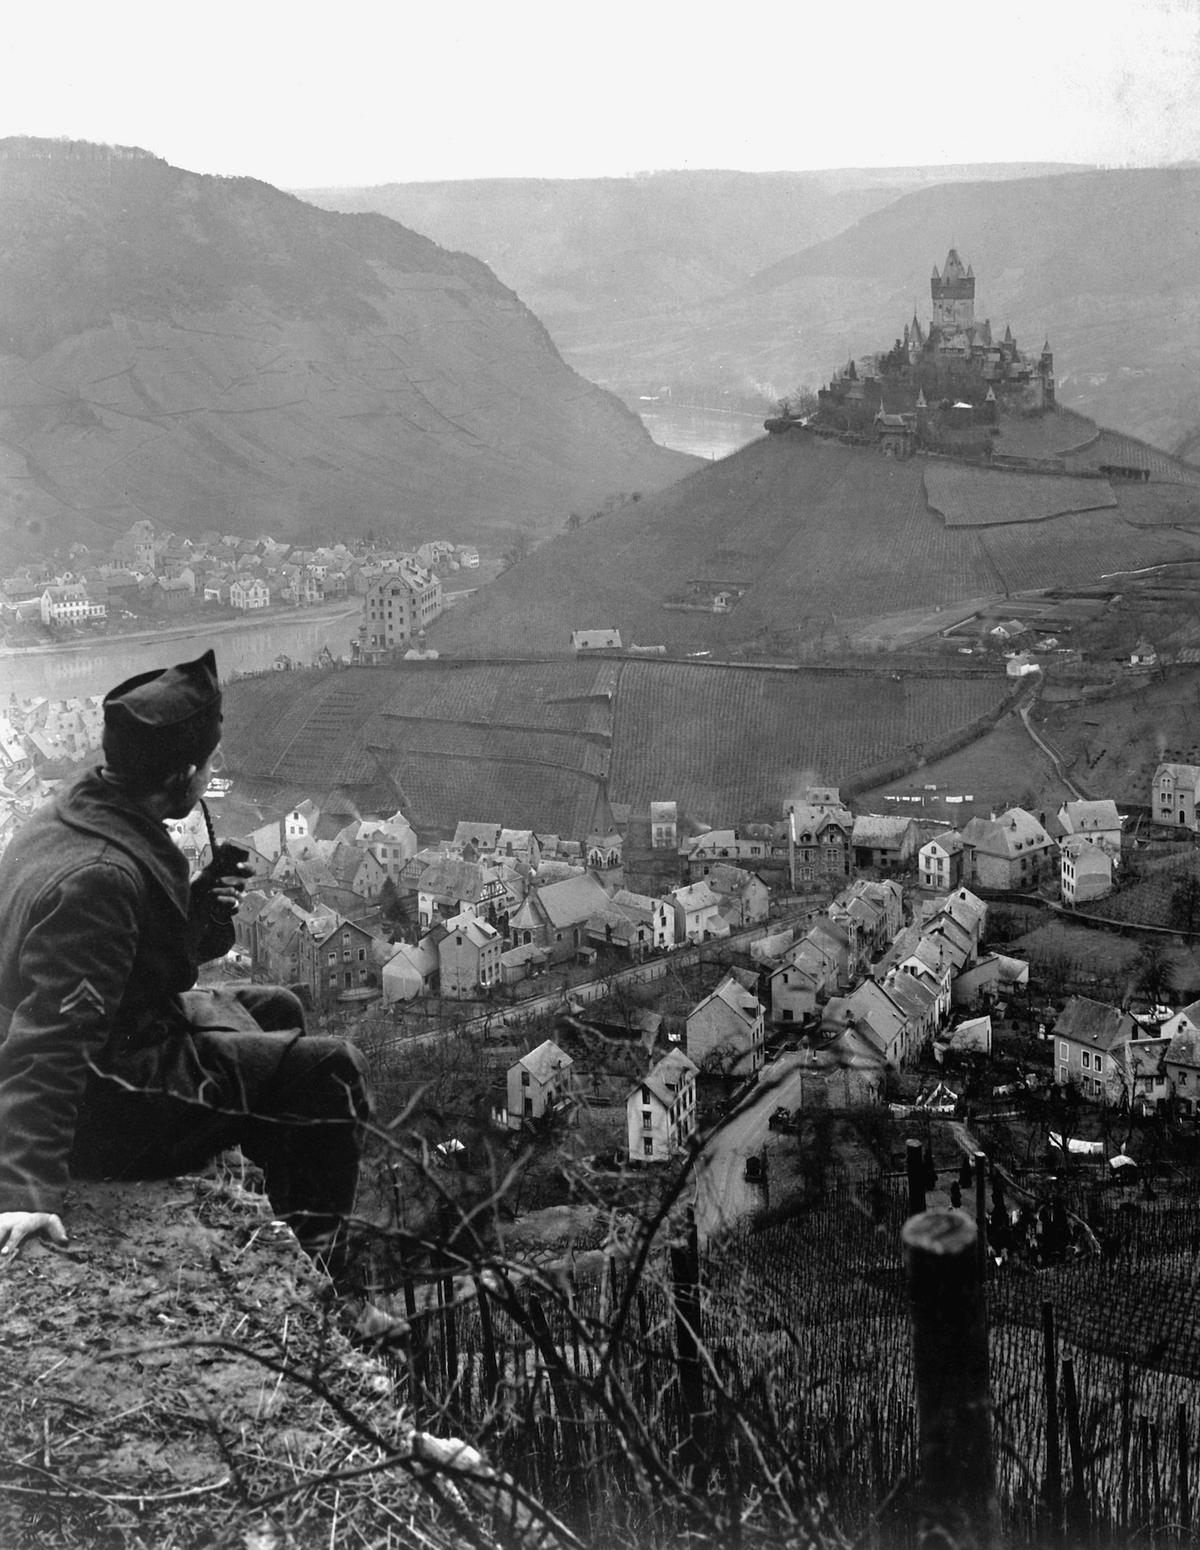 A view of Cochem on Jan. 9, 1919, taken by the photo unit of the Fourth U.S. Army Corps, which had its headquarters at Cochem on the Moselle River. (<a href="https://commons.wikimedia.org/wiki/File:View_of_Cochem_(Mosel),_Germany,_on_9_January_1919_(86698479).jpg">Public Domain</a>)